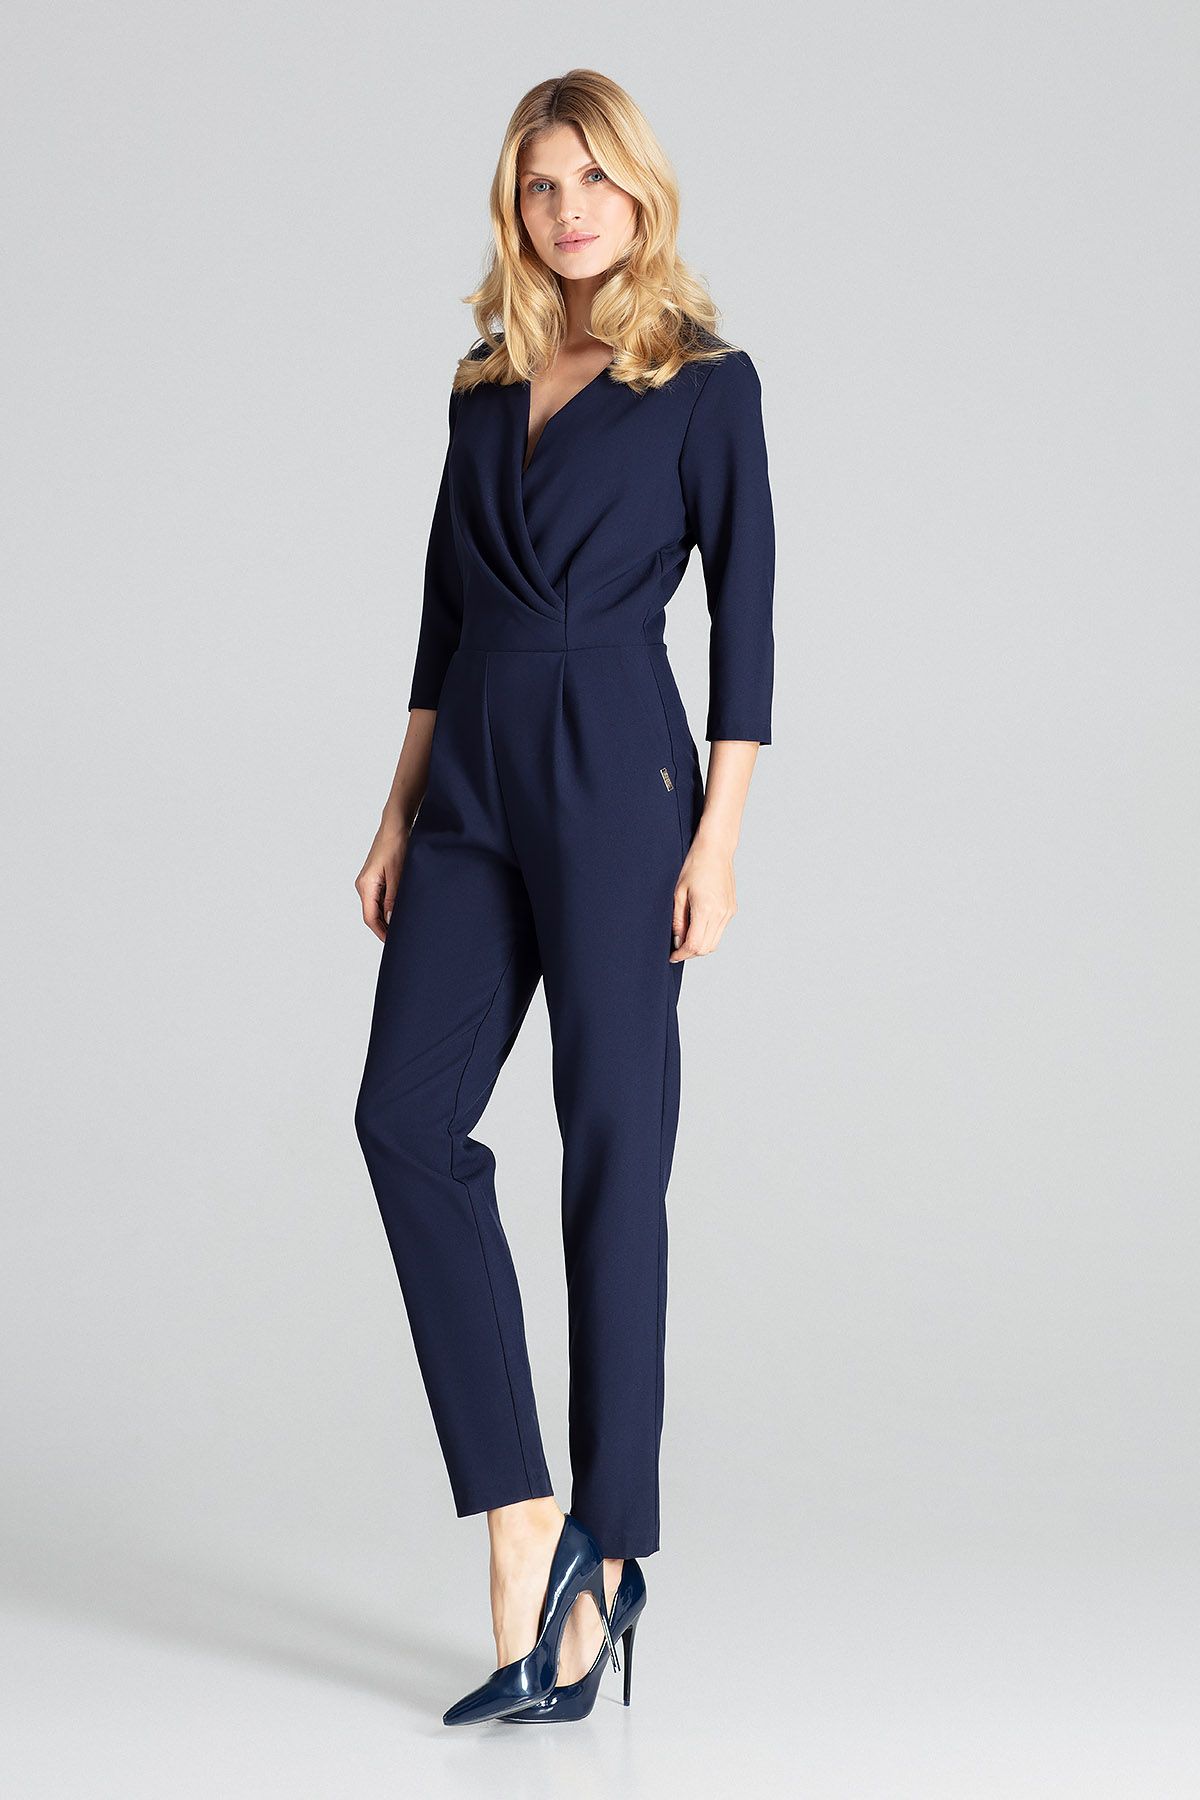 Navy Jumpsuit With 3 4 Sleeves